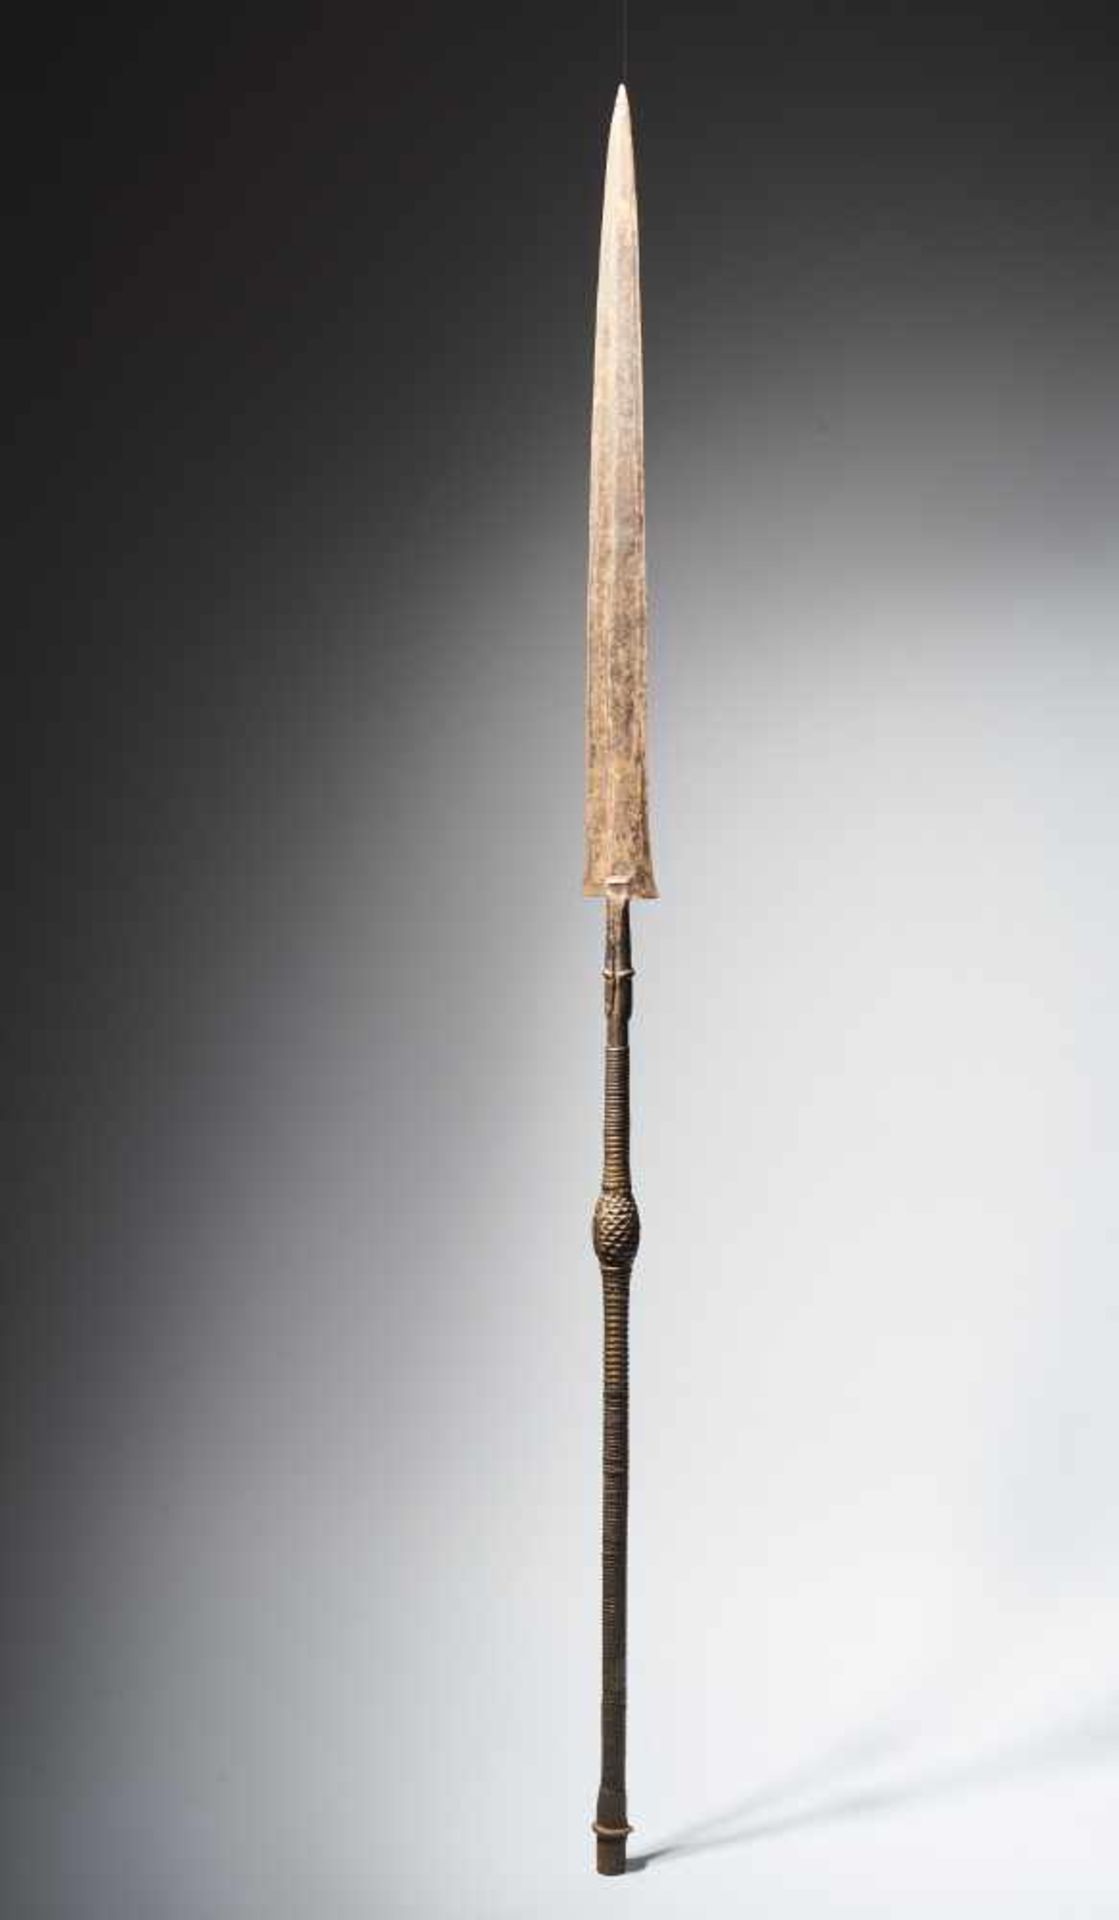 Forged Spear with Decorated Shaft, Kuba People - Tribal ArtThis metal spear has a thin, triangular